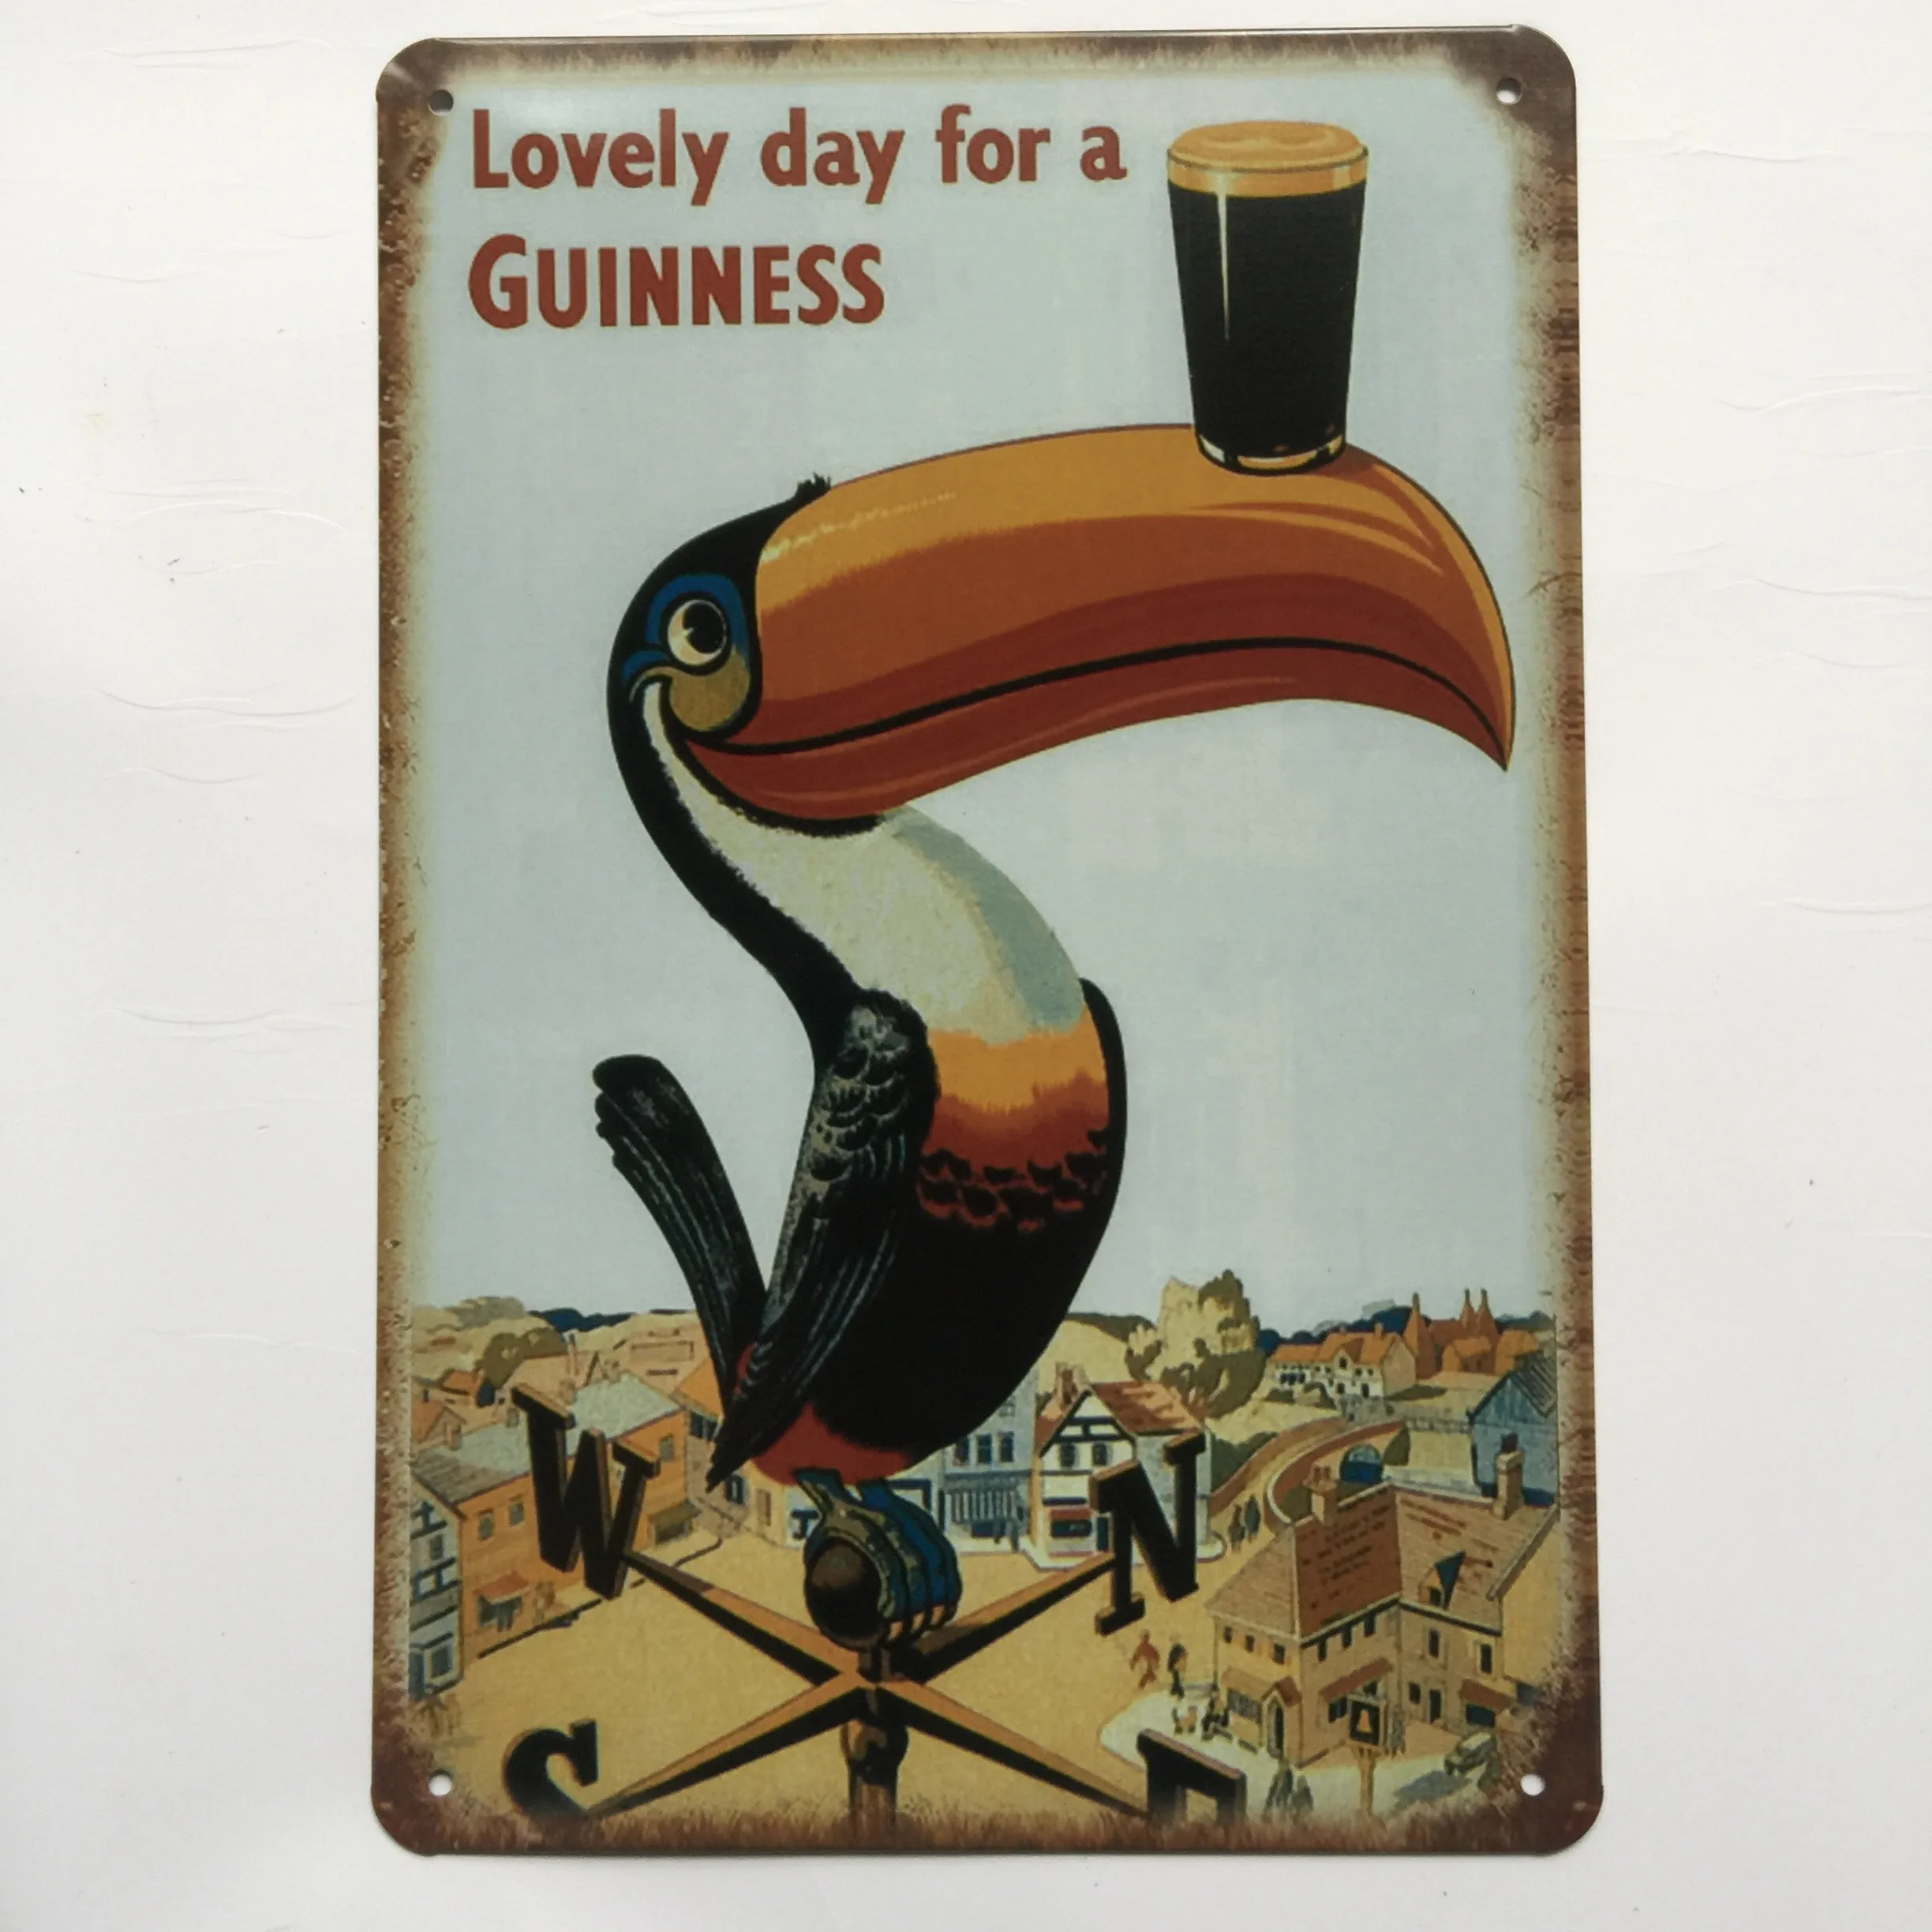 

My Goodness My Guinness Metal Tin Sign Painting Signs Vintage Poster Bar Pub Decorative Plaque Home Decor Beer Advertising Plate